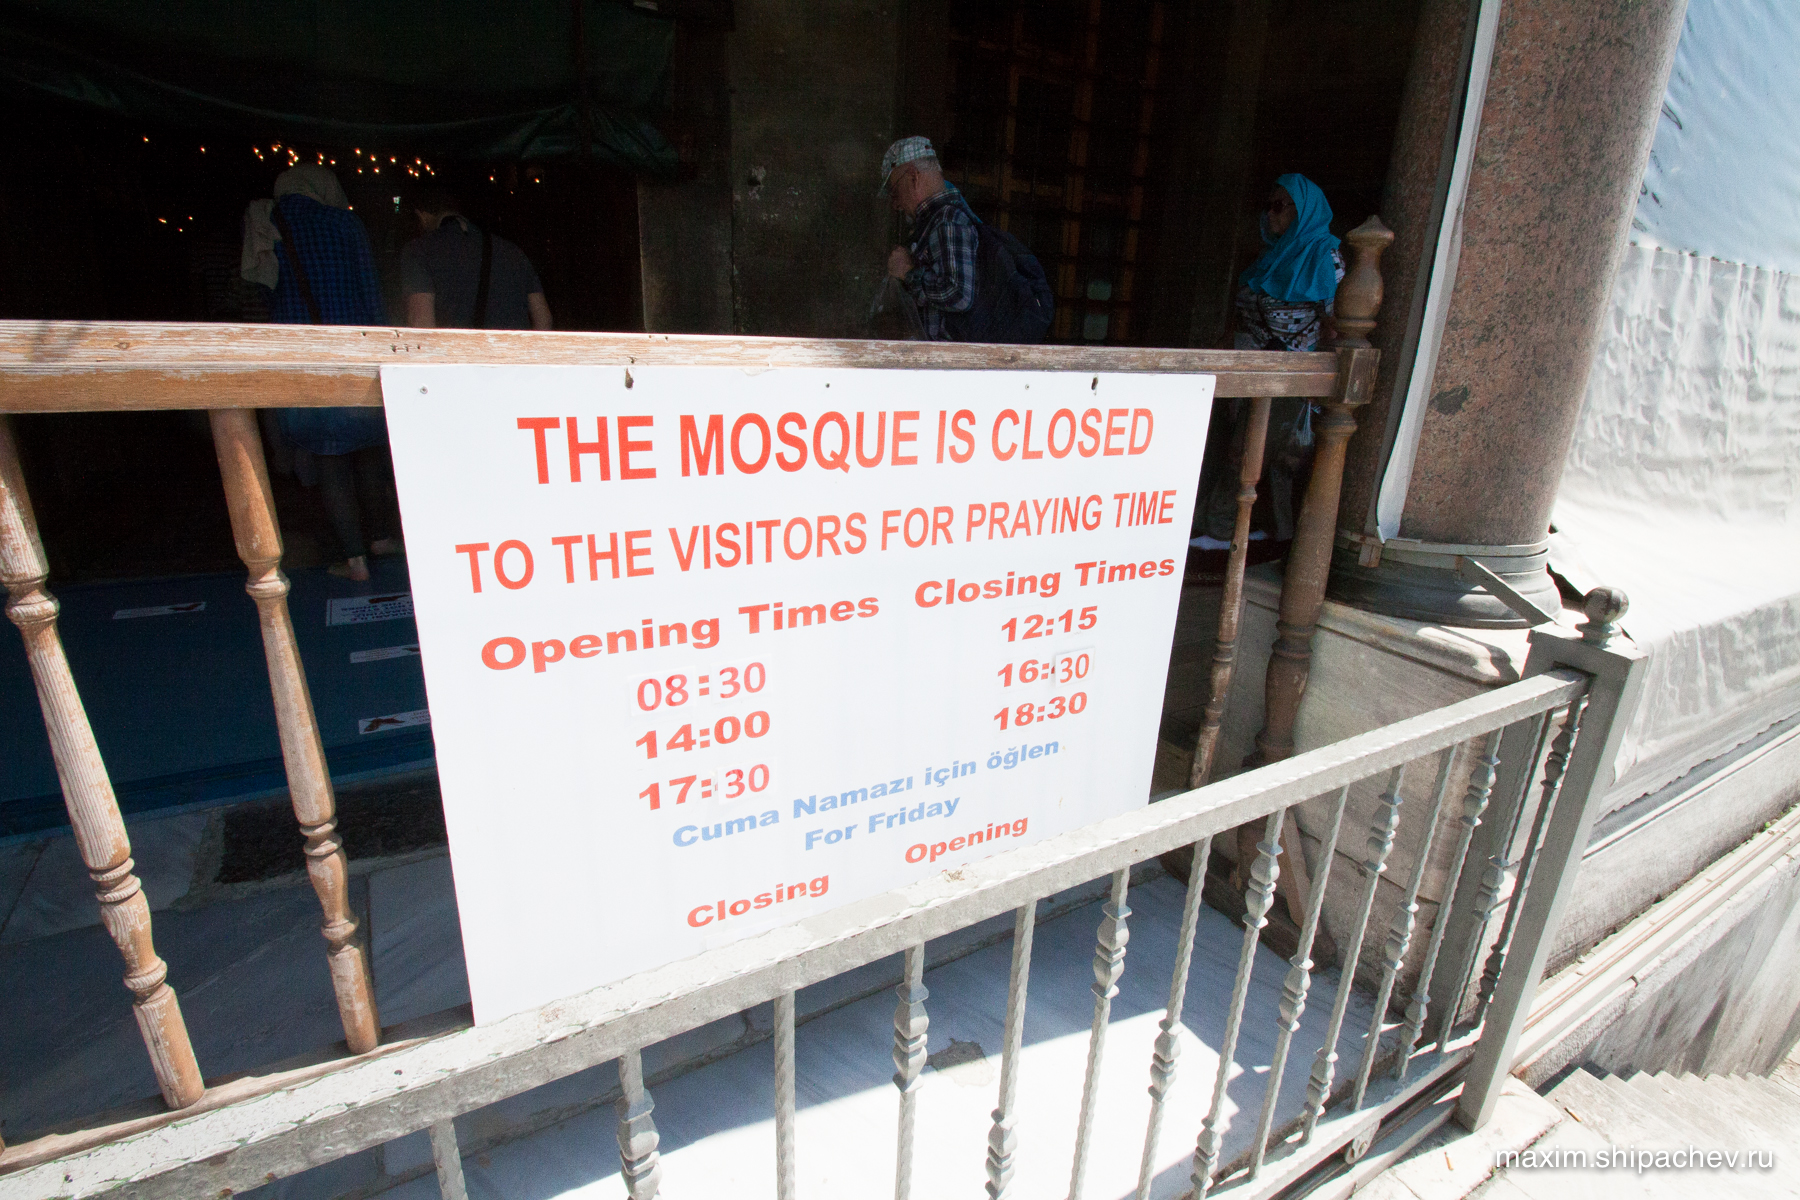 The mosque is closed